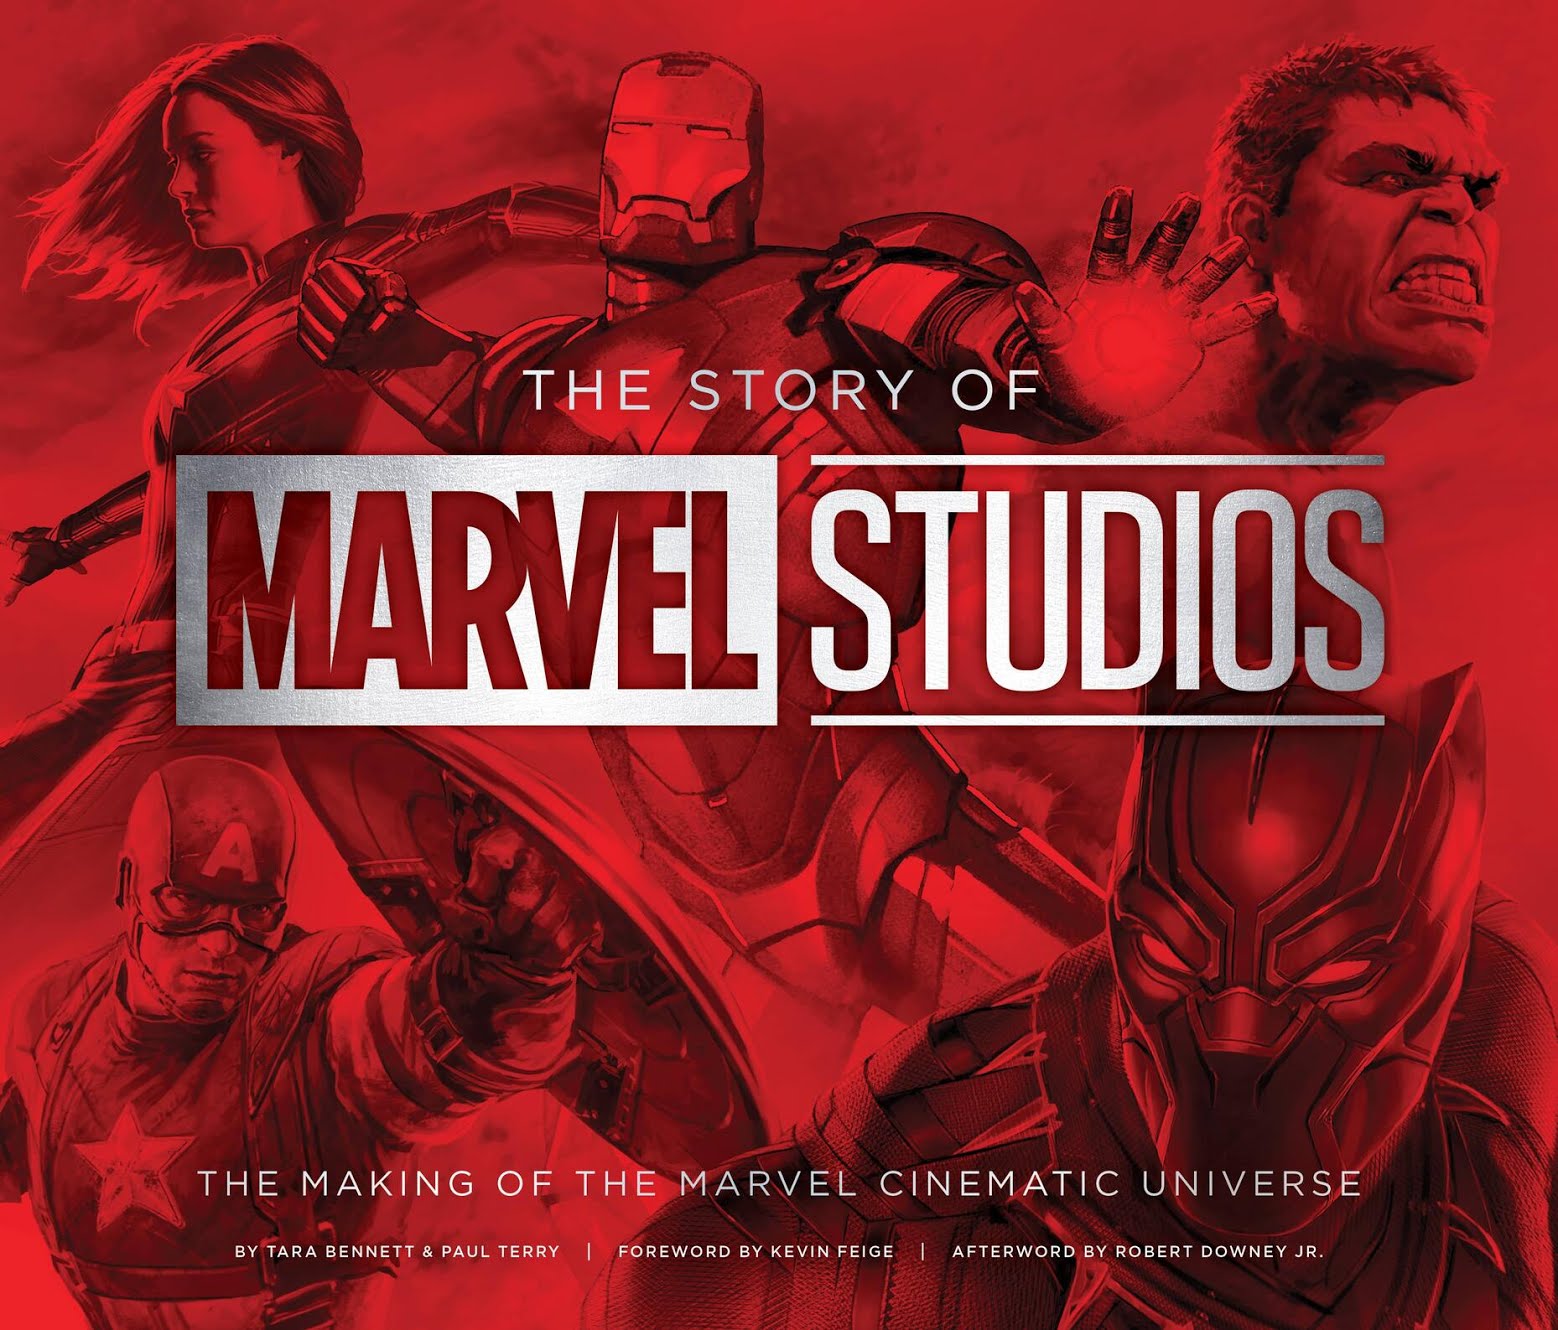 Marvel Studios Reveals Trailers For Upcoming Movies and Series 2022